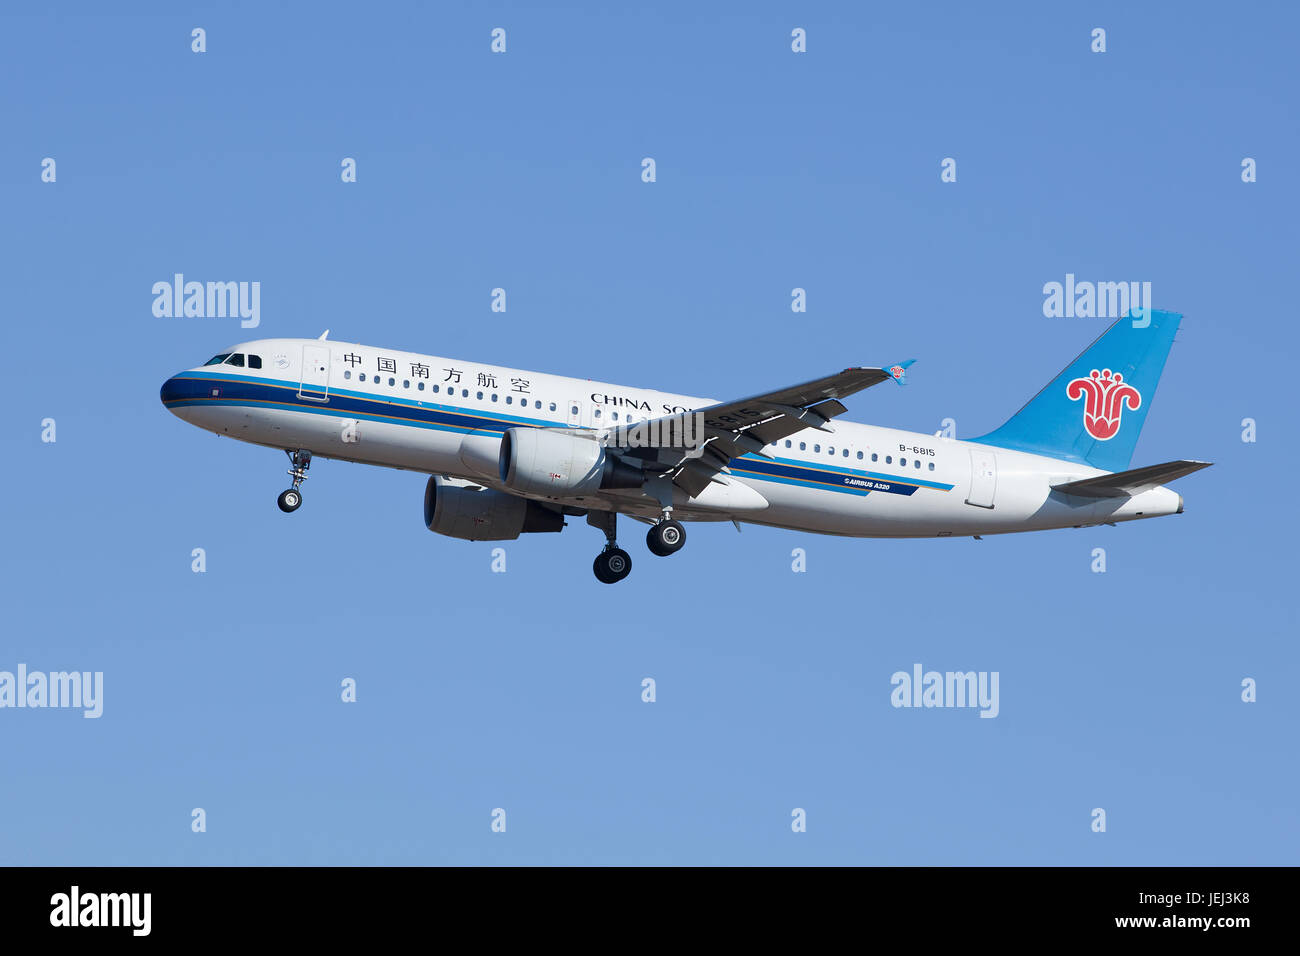 BEIJING-FEBRUARY 18, 2015. Southern Airlines B-6815 Airbus A320 landing in Beijing. A total of 5,677 Airbus A320 family aircraft have been delivered. Stock Photo